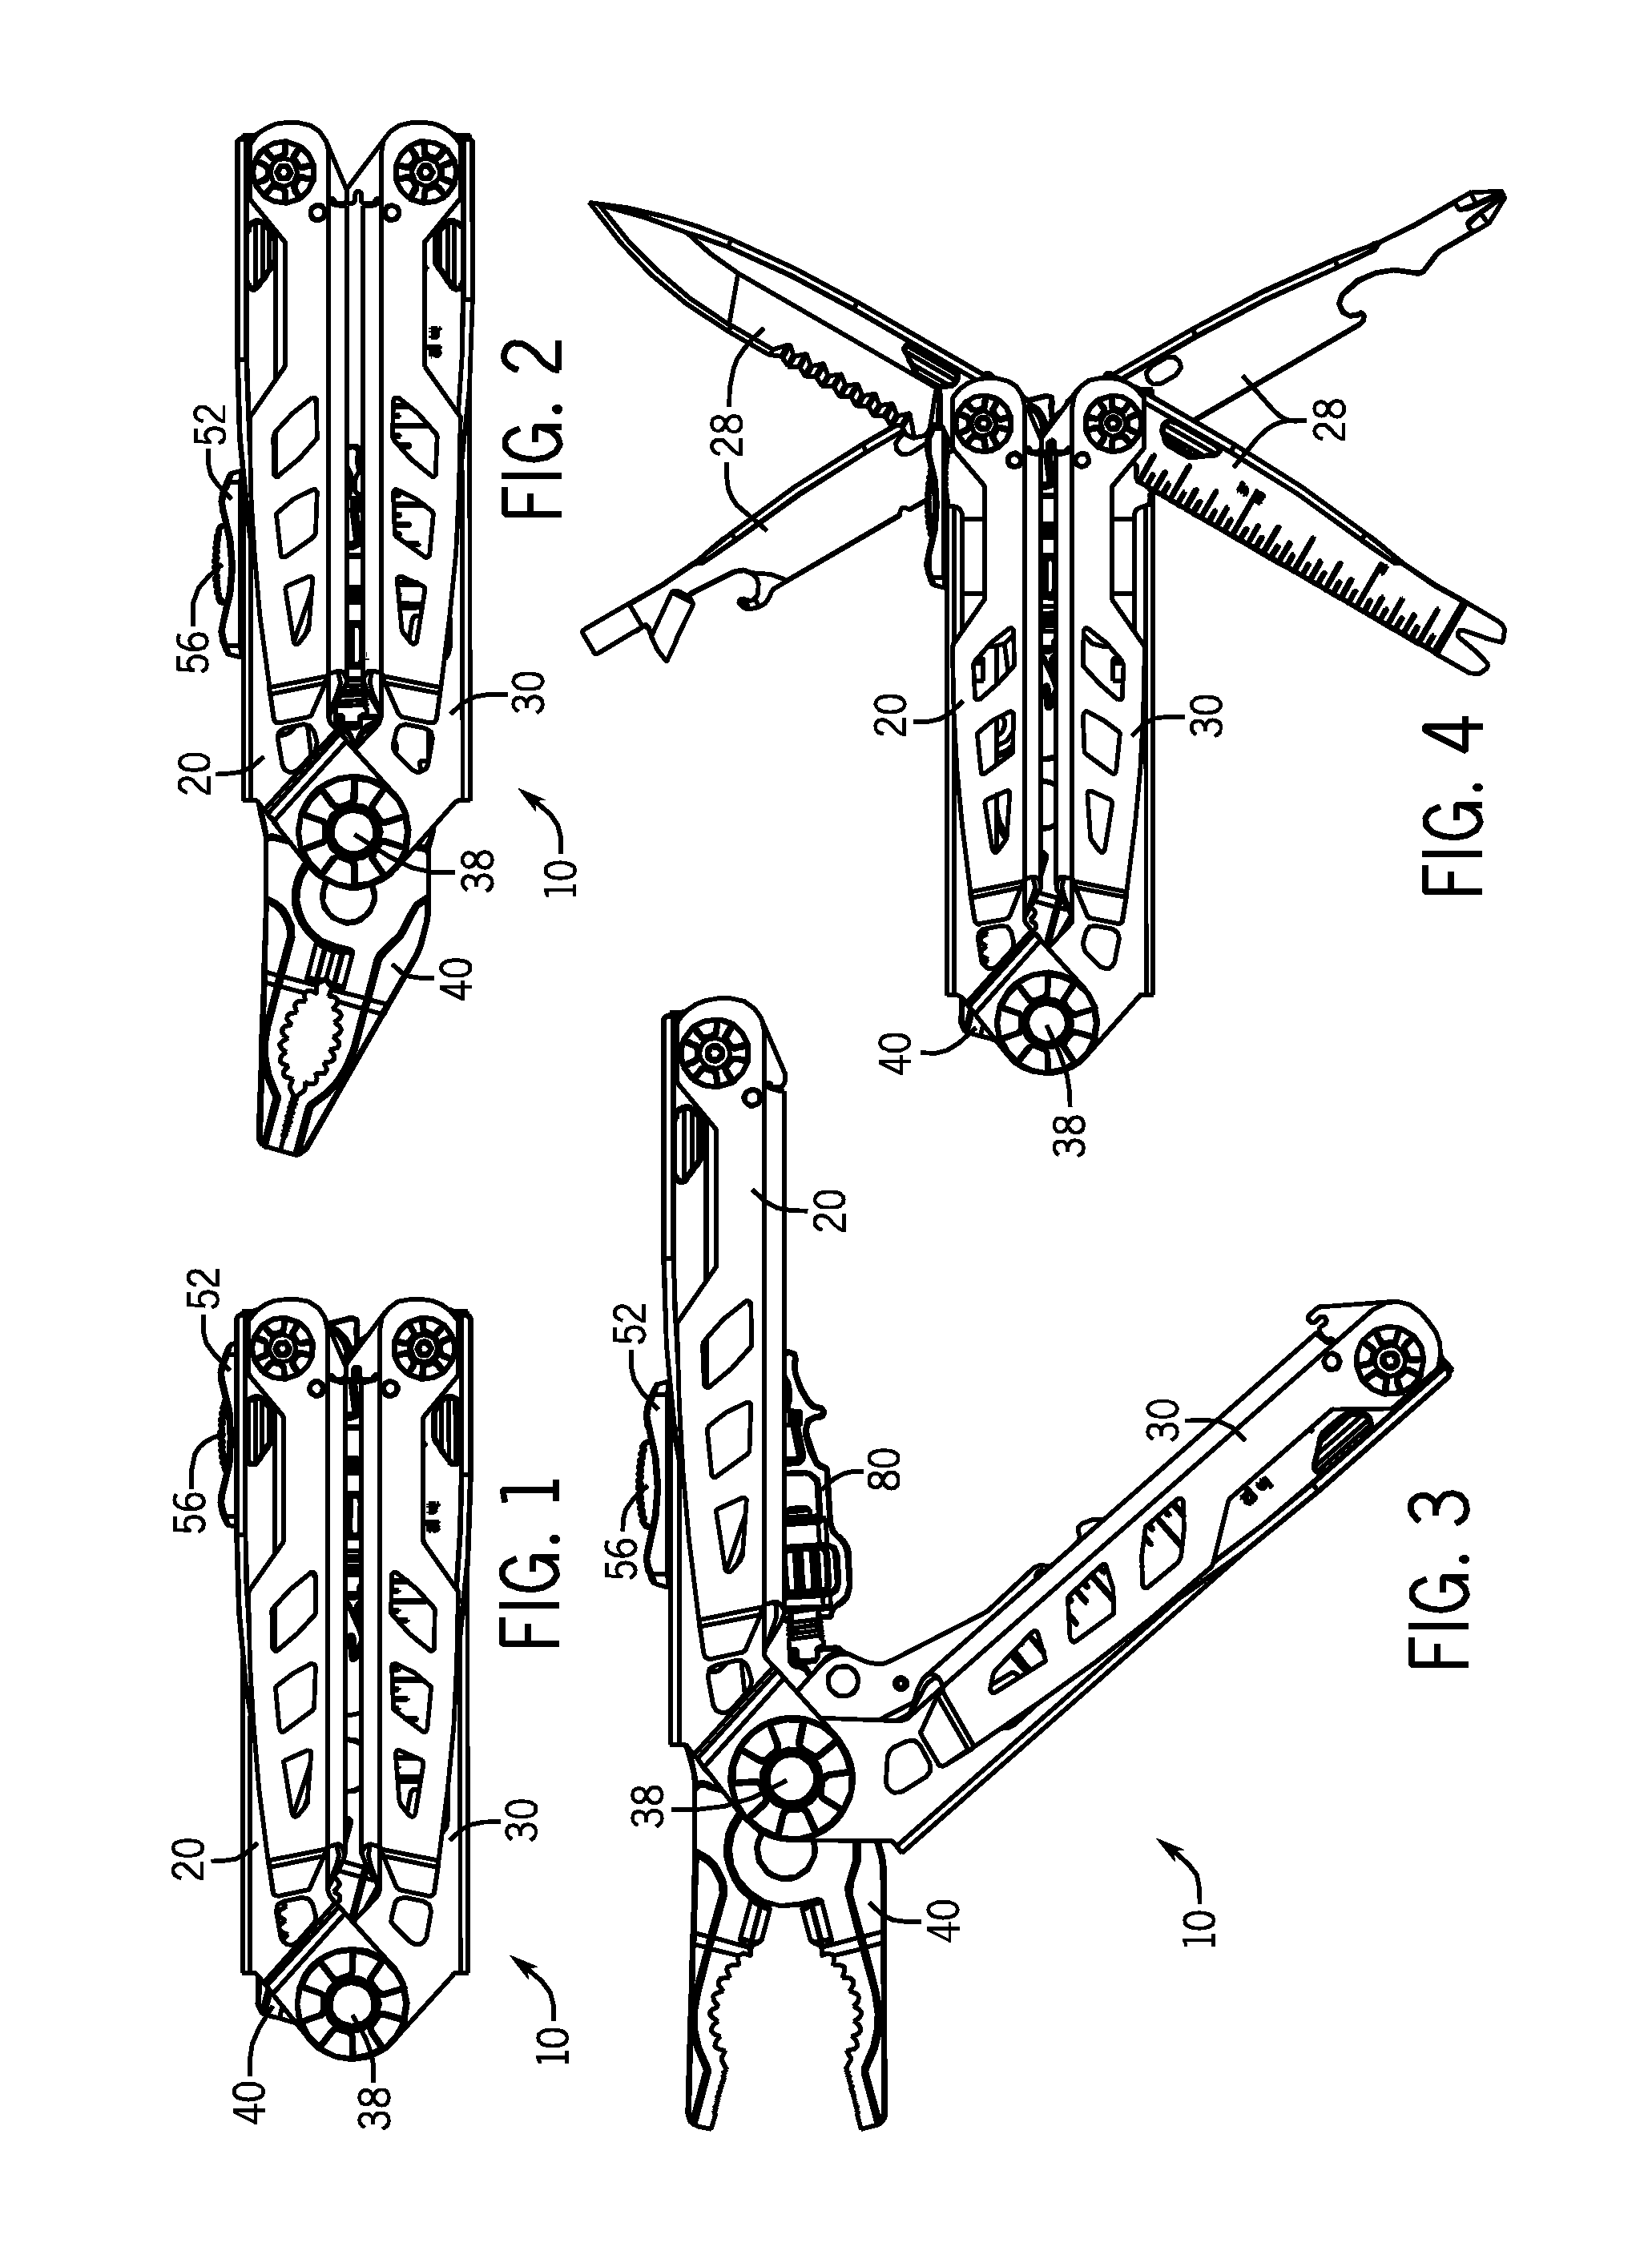 Multi-function tool with locking pliers